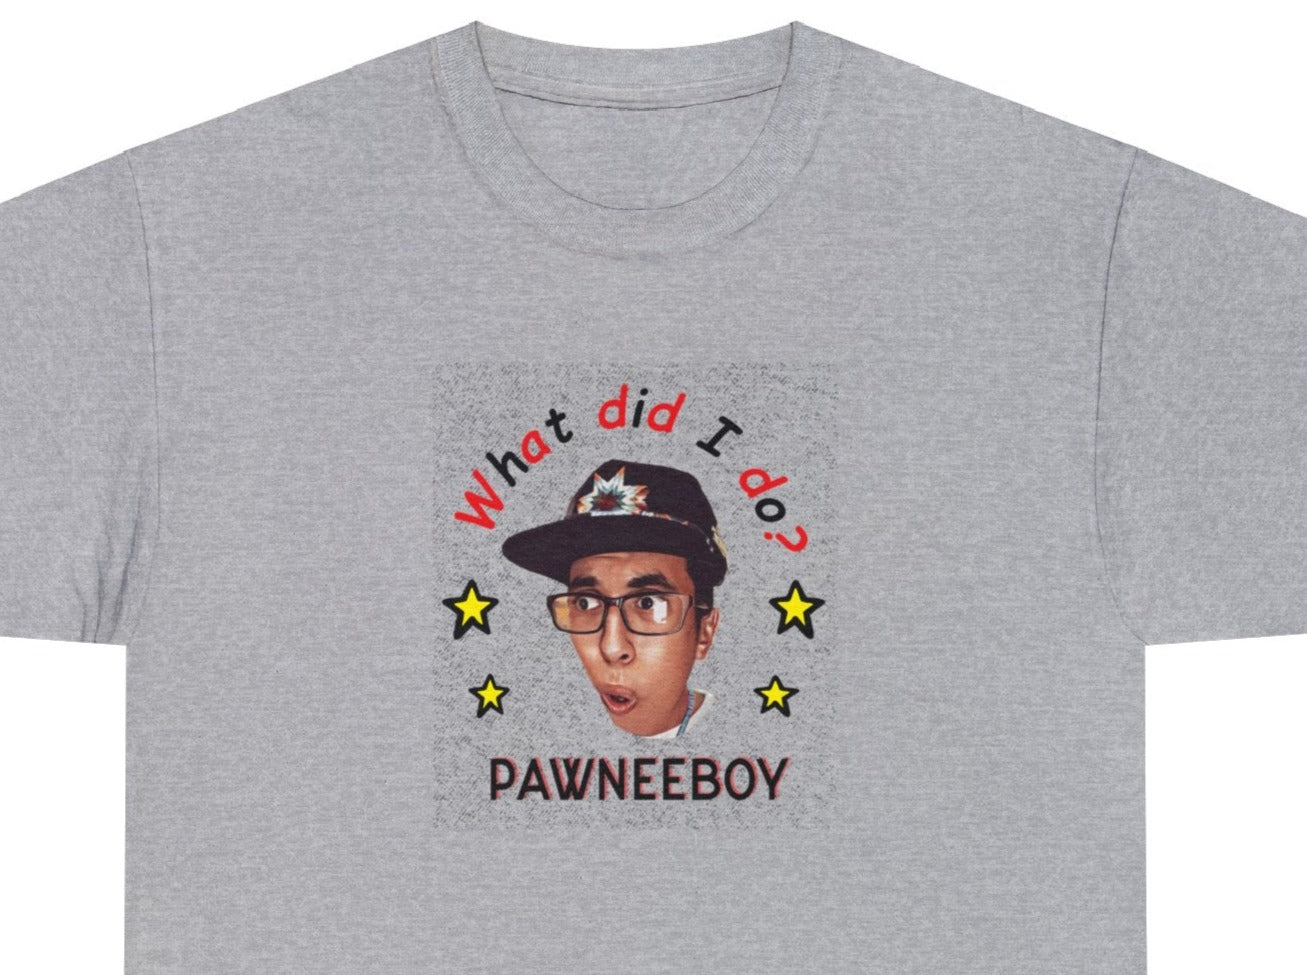 Pawneeboy - What Did I Do? Shirt Native American (Special Order)